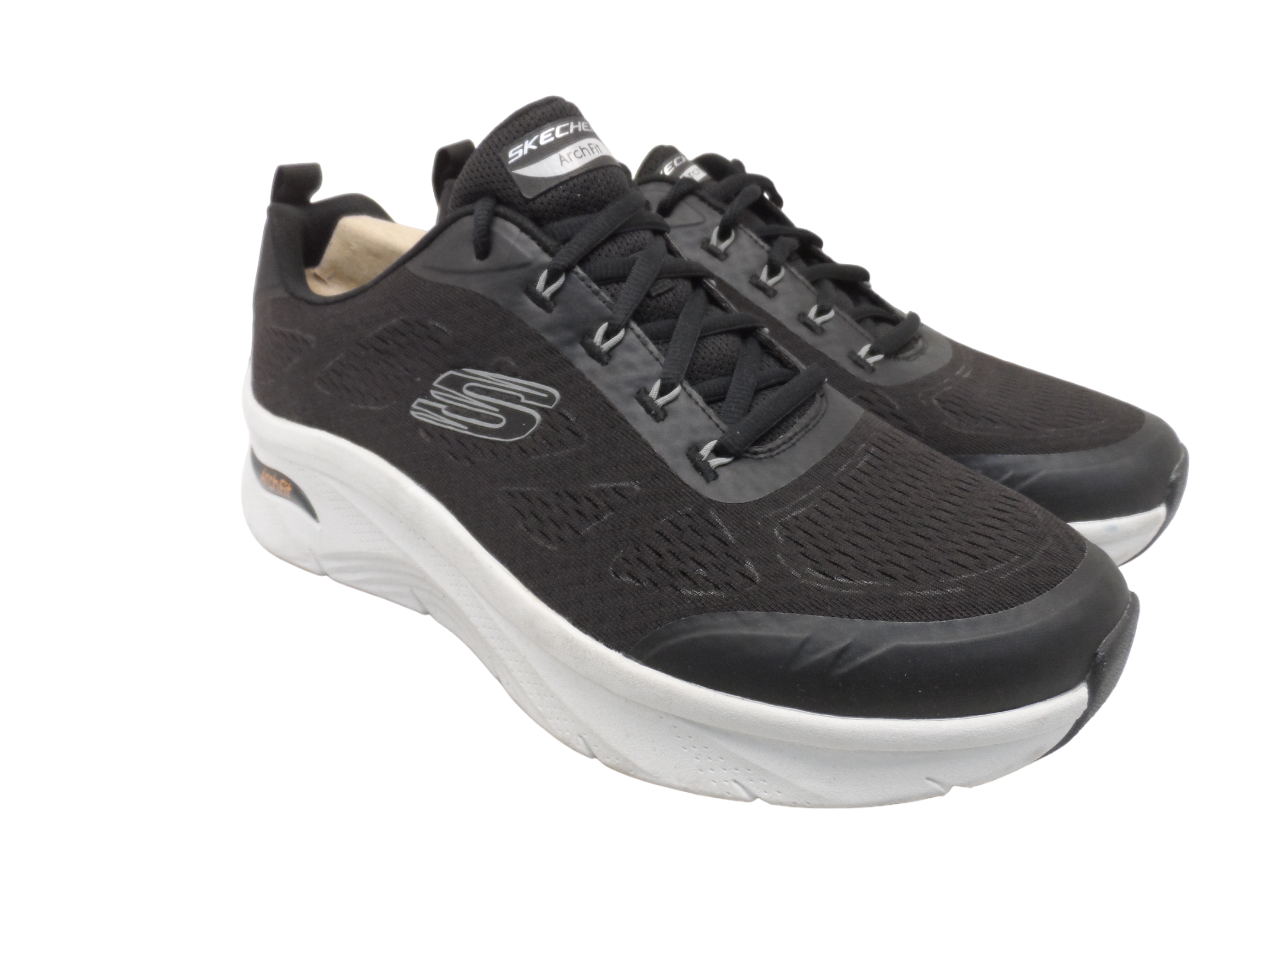 Primary image for Skechers Men's Arch-Fit Extra Wide Athletic Sneakers 232502WW Black Size 12M